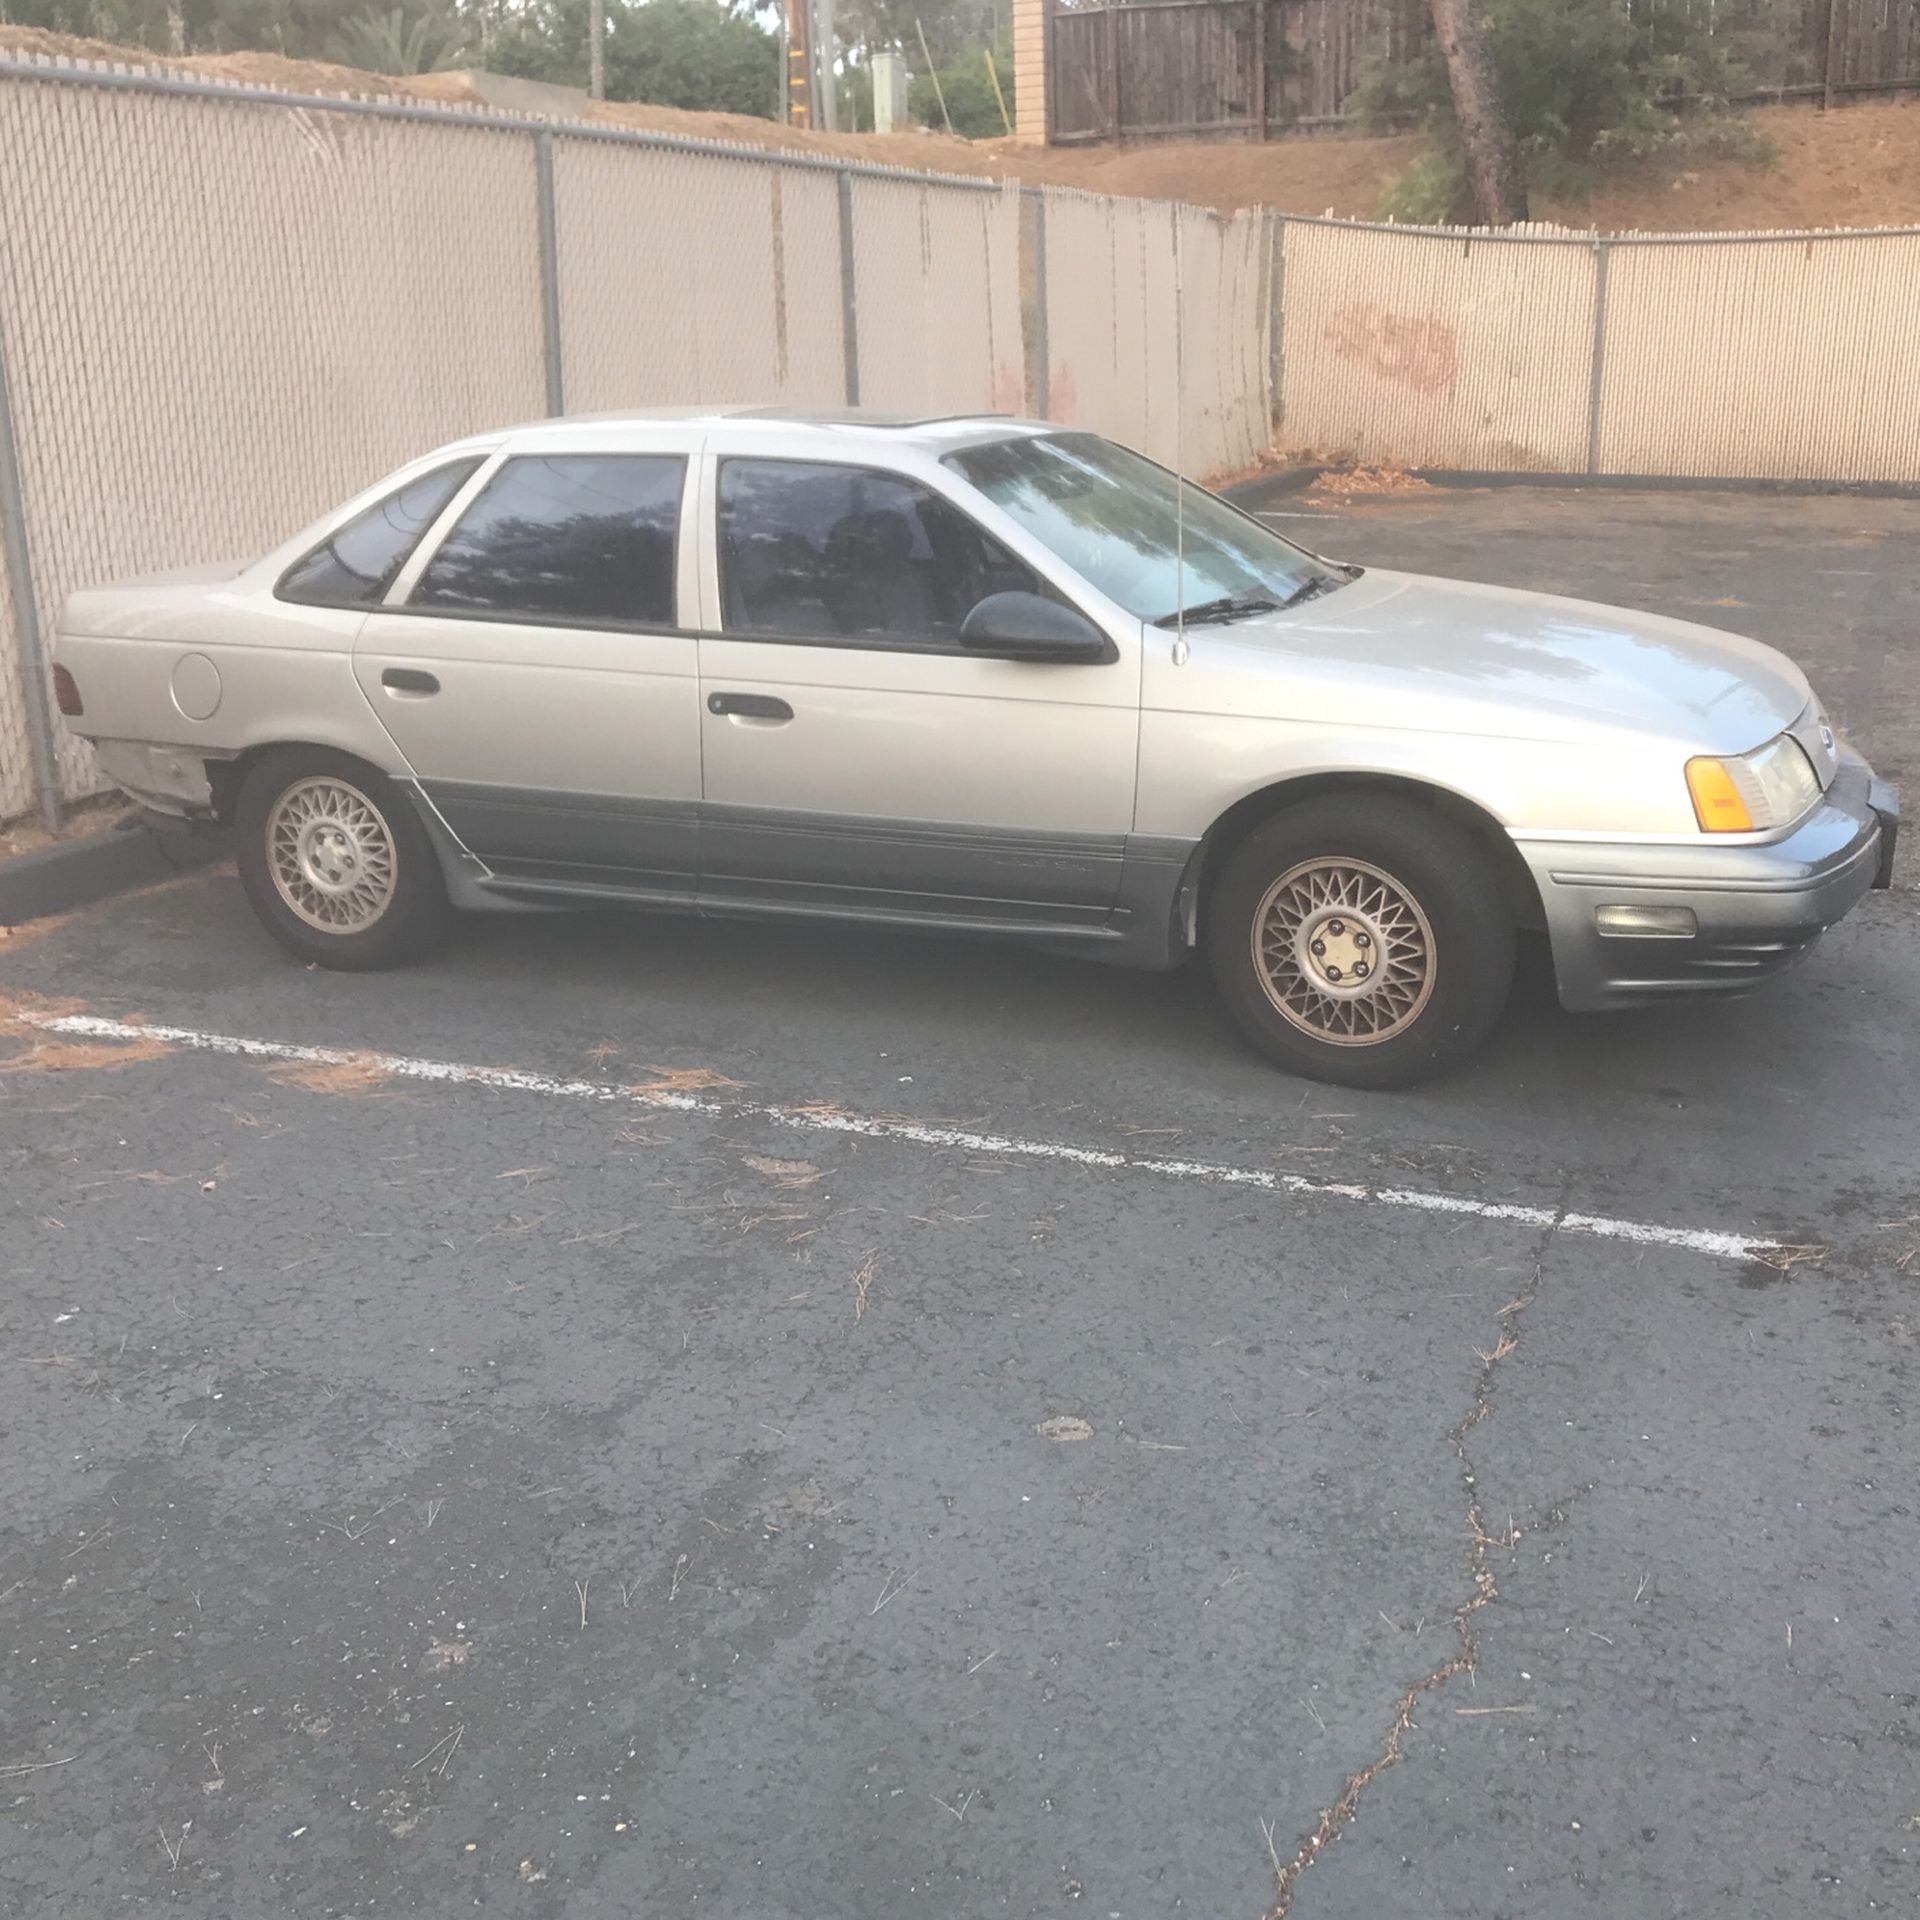 Sho Ford Taurus  1989   Salvage Title  